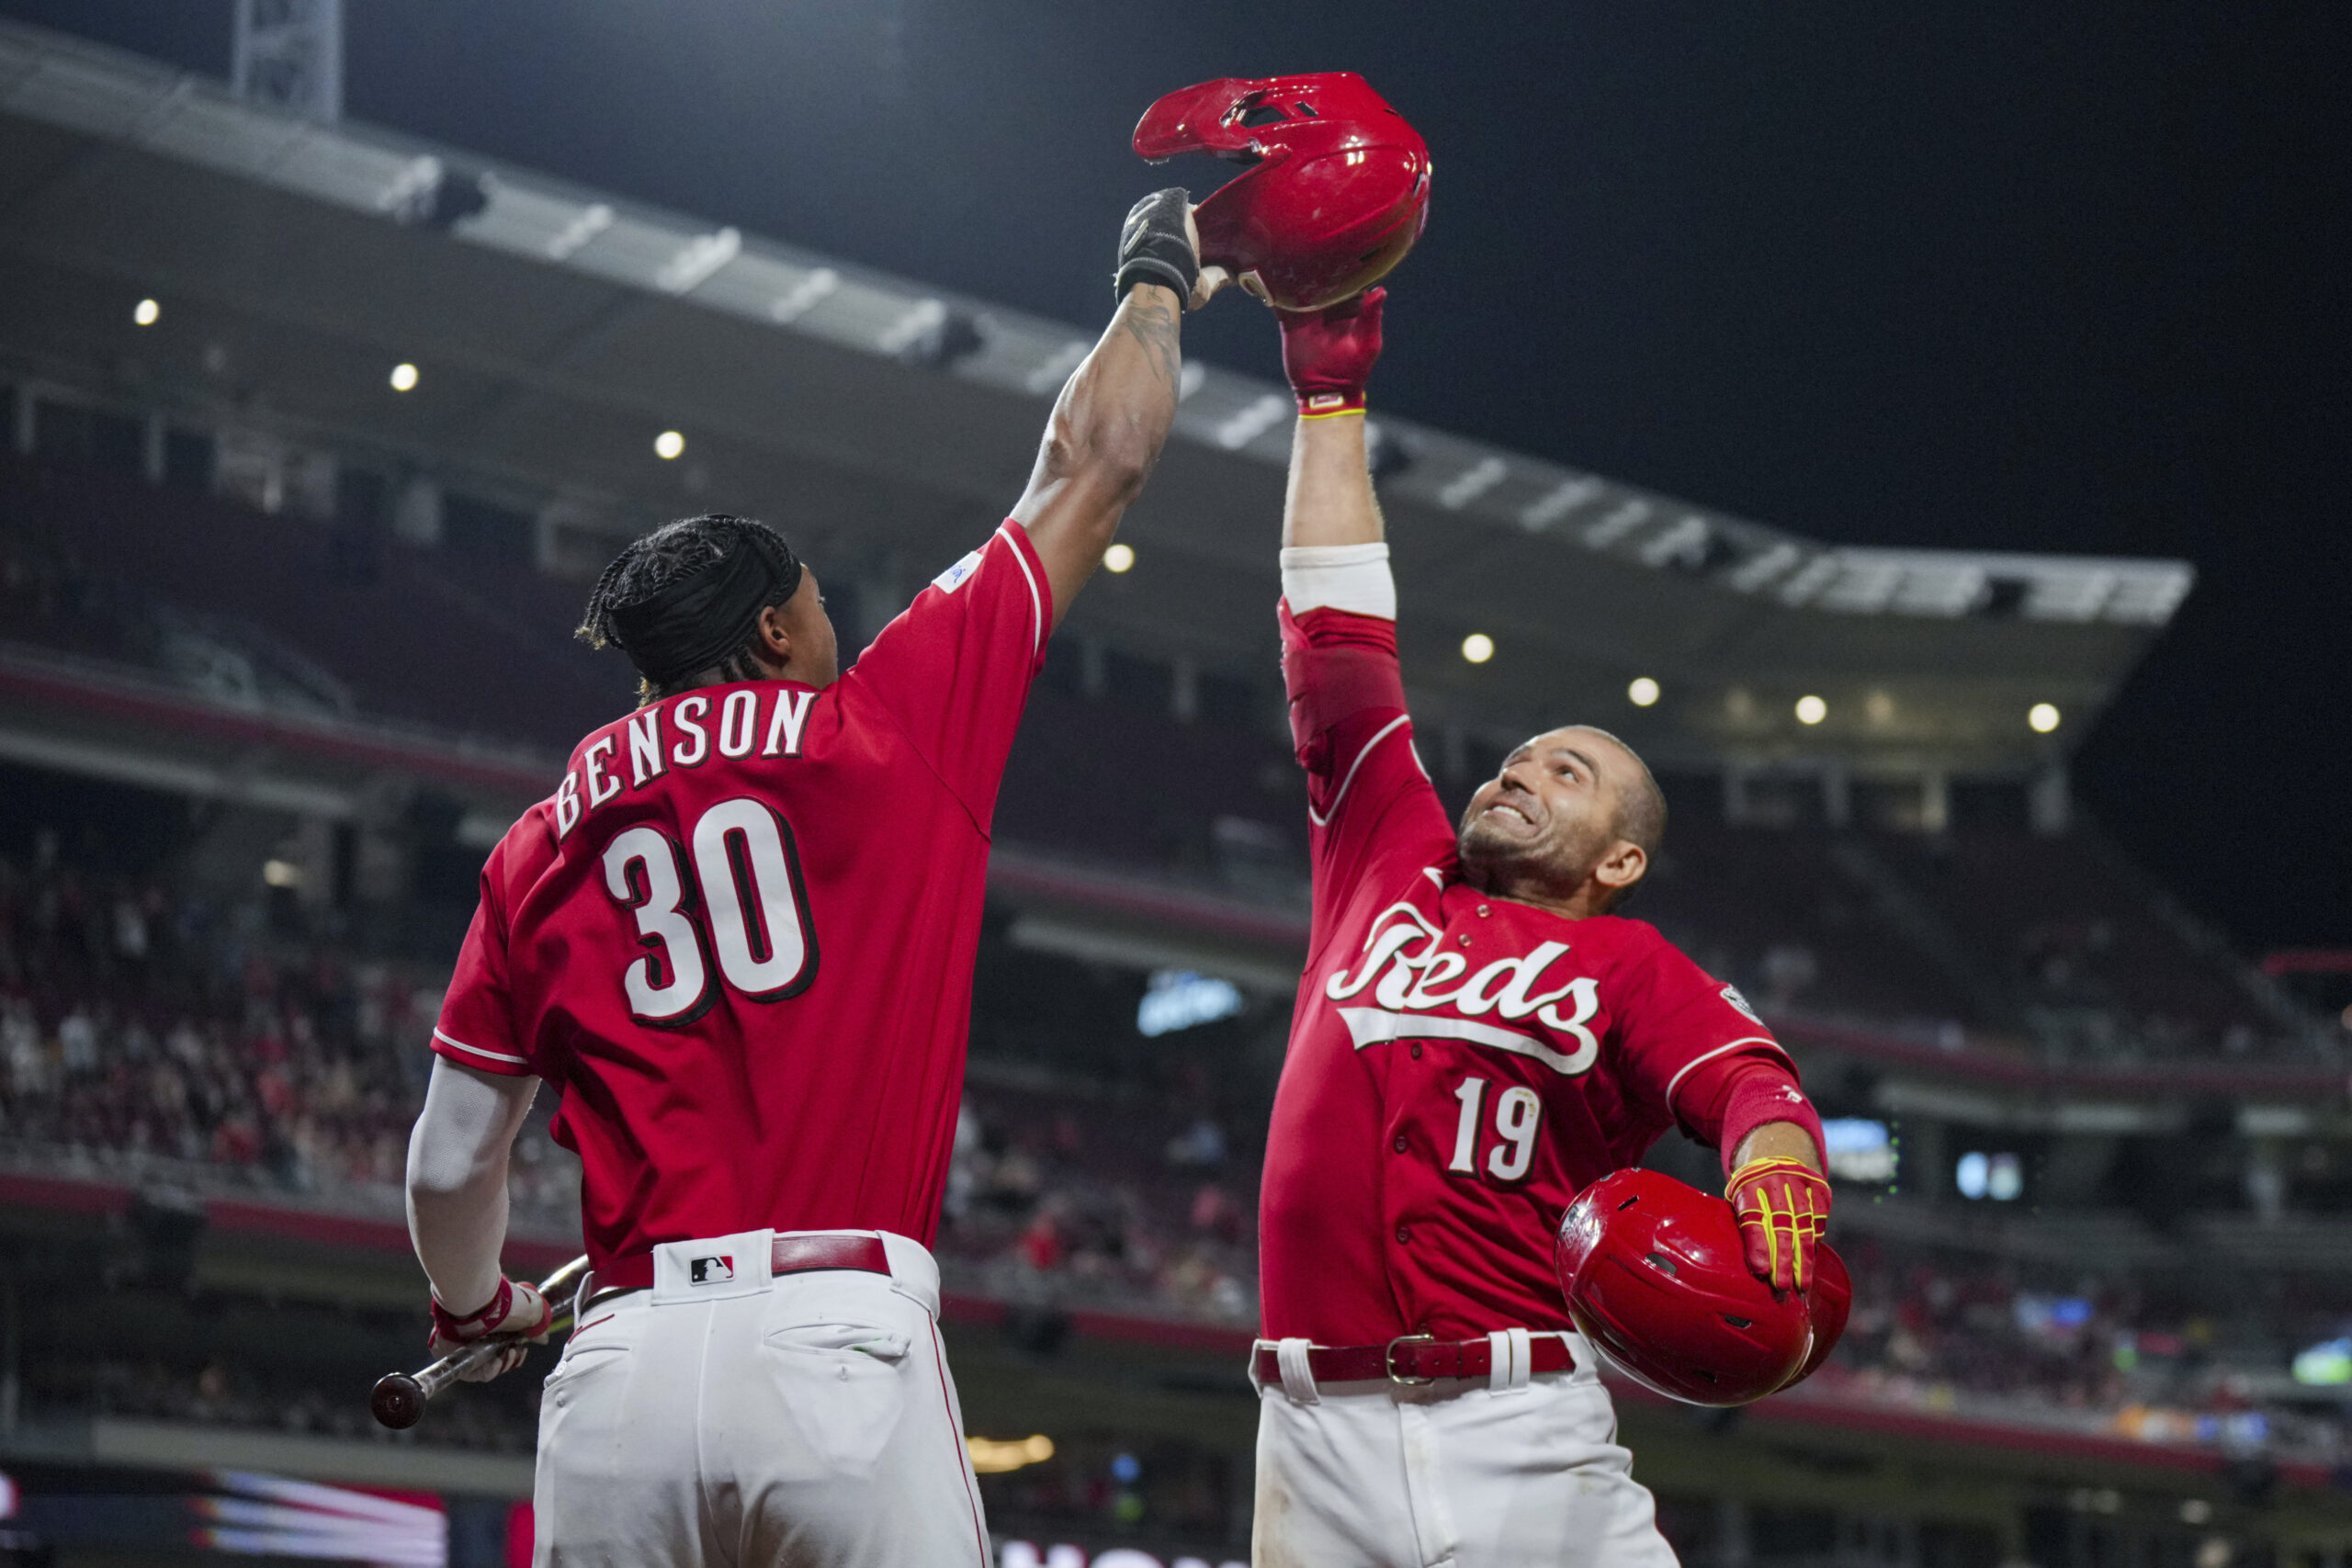 Cincinnati Reds' Joey Votto, right, celebrates with Will Benson after hitting a two-run home run ag...